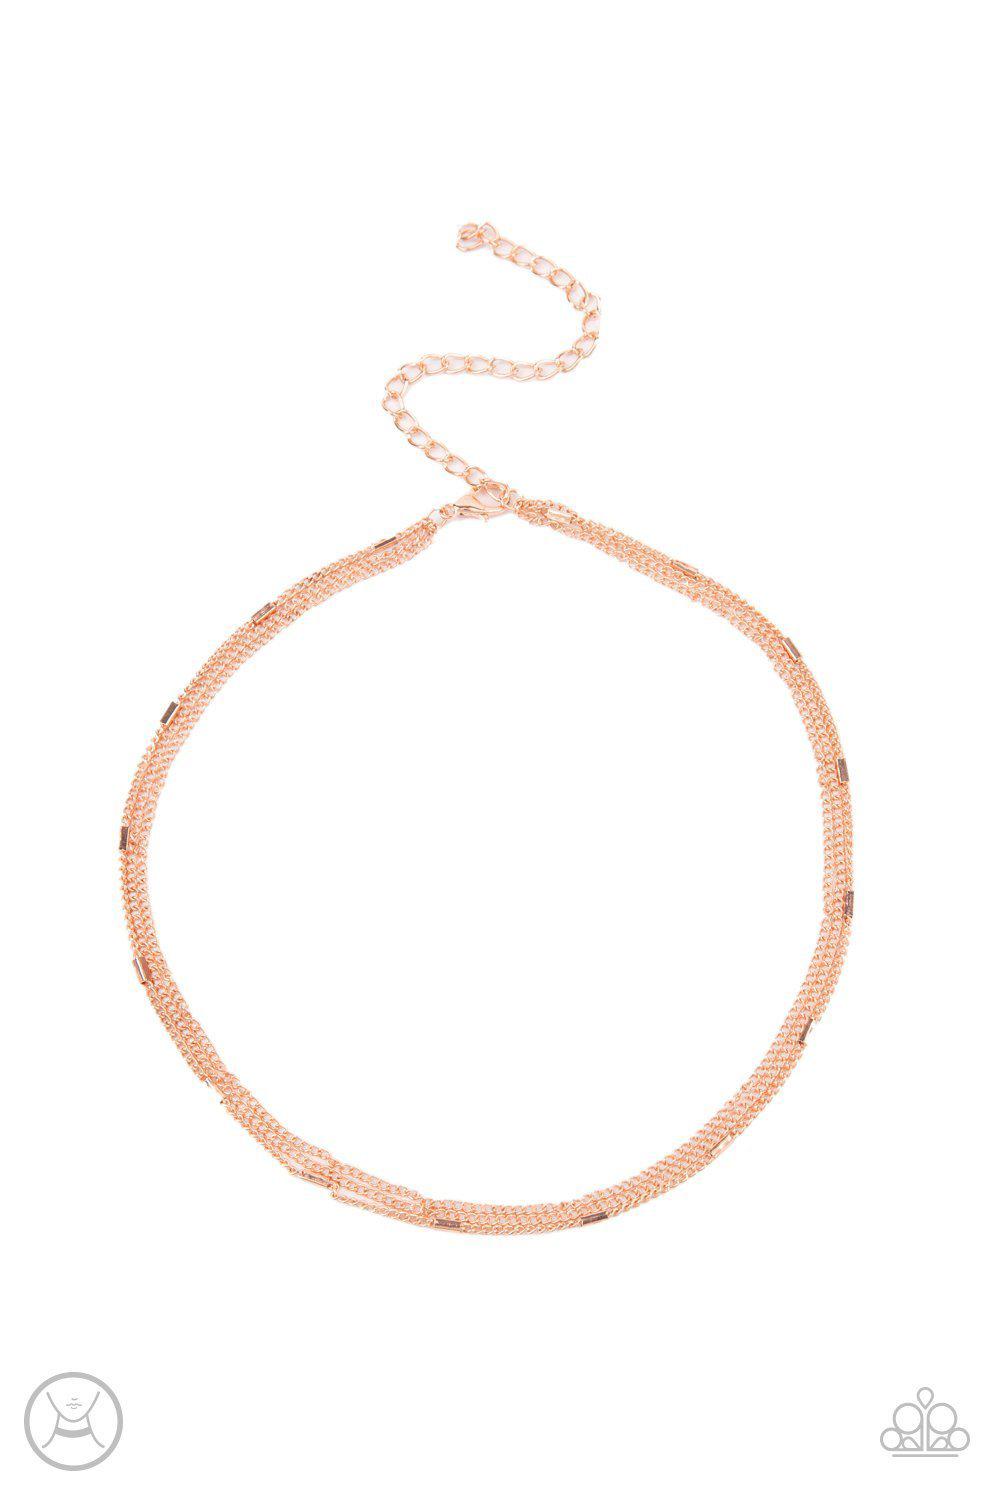 Need I SLAY More Copper Choker Necklace - Paparazzi Accessories - lightbox -CarasShop.com - $5 Jewelry by Cara Jewels